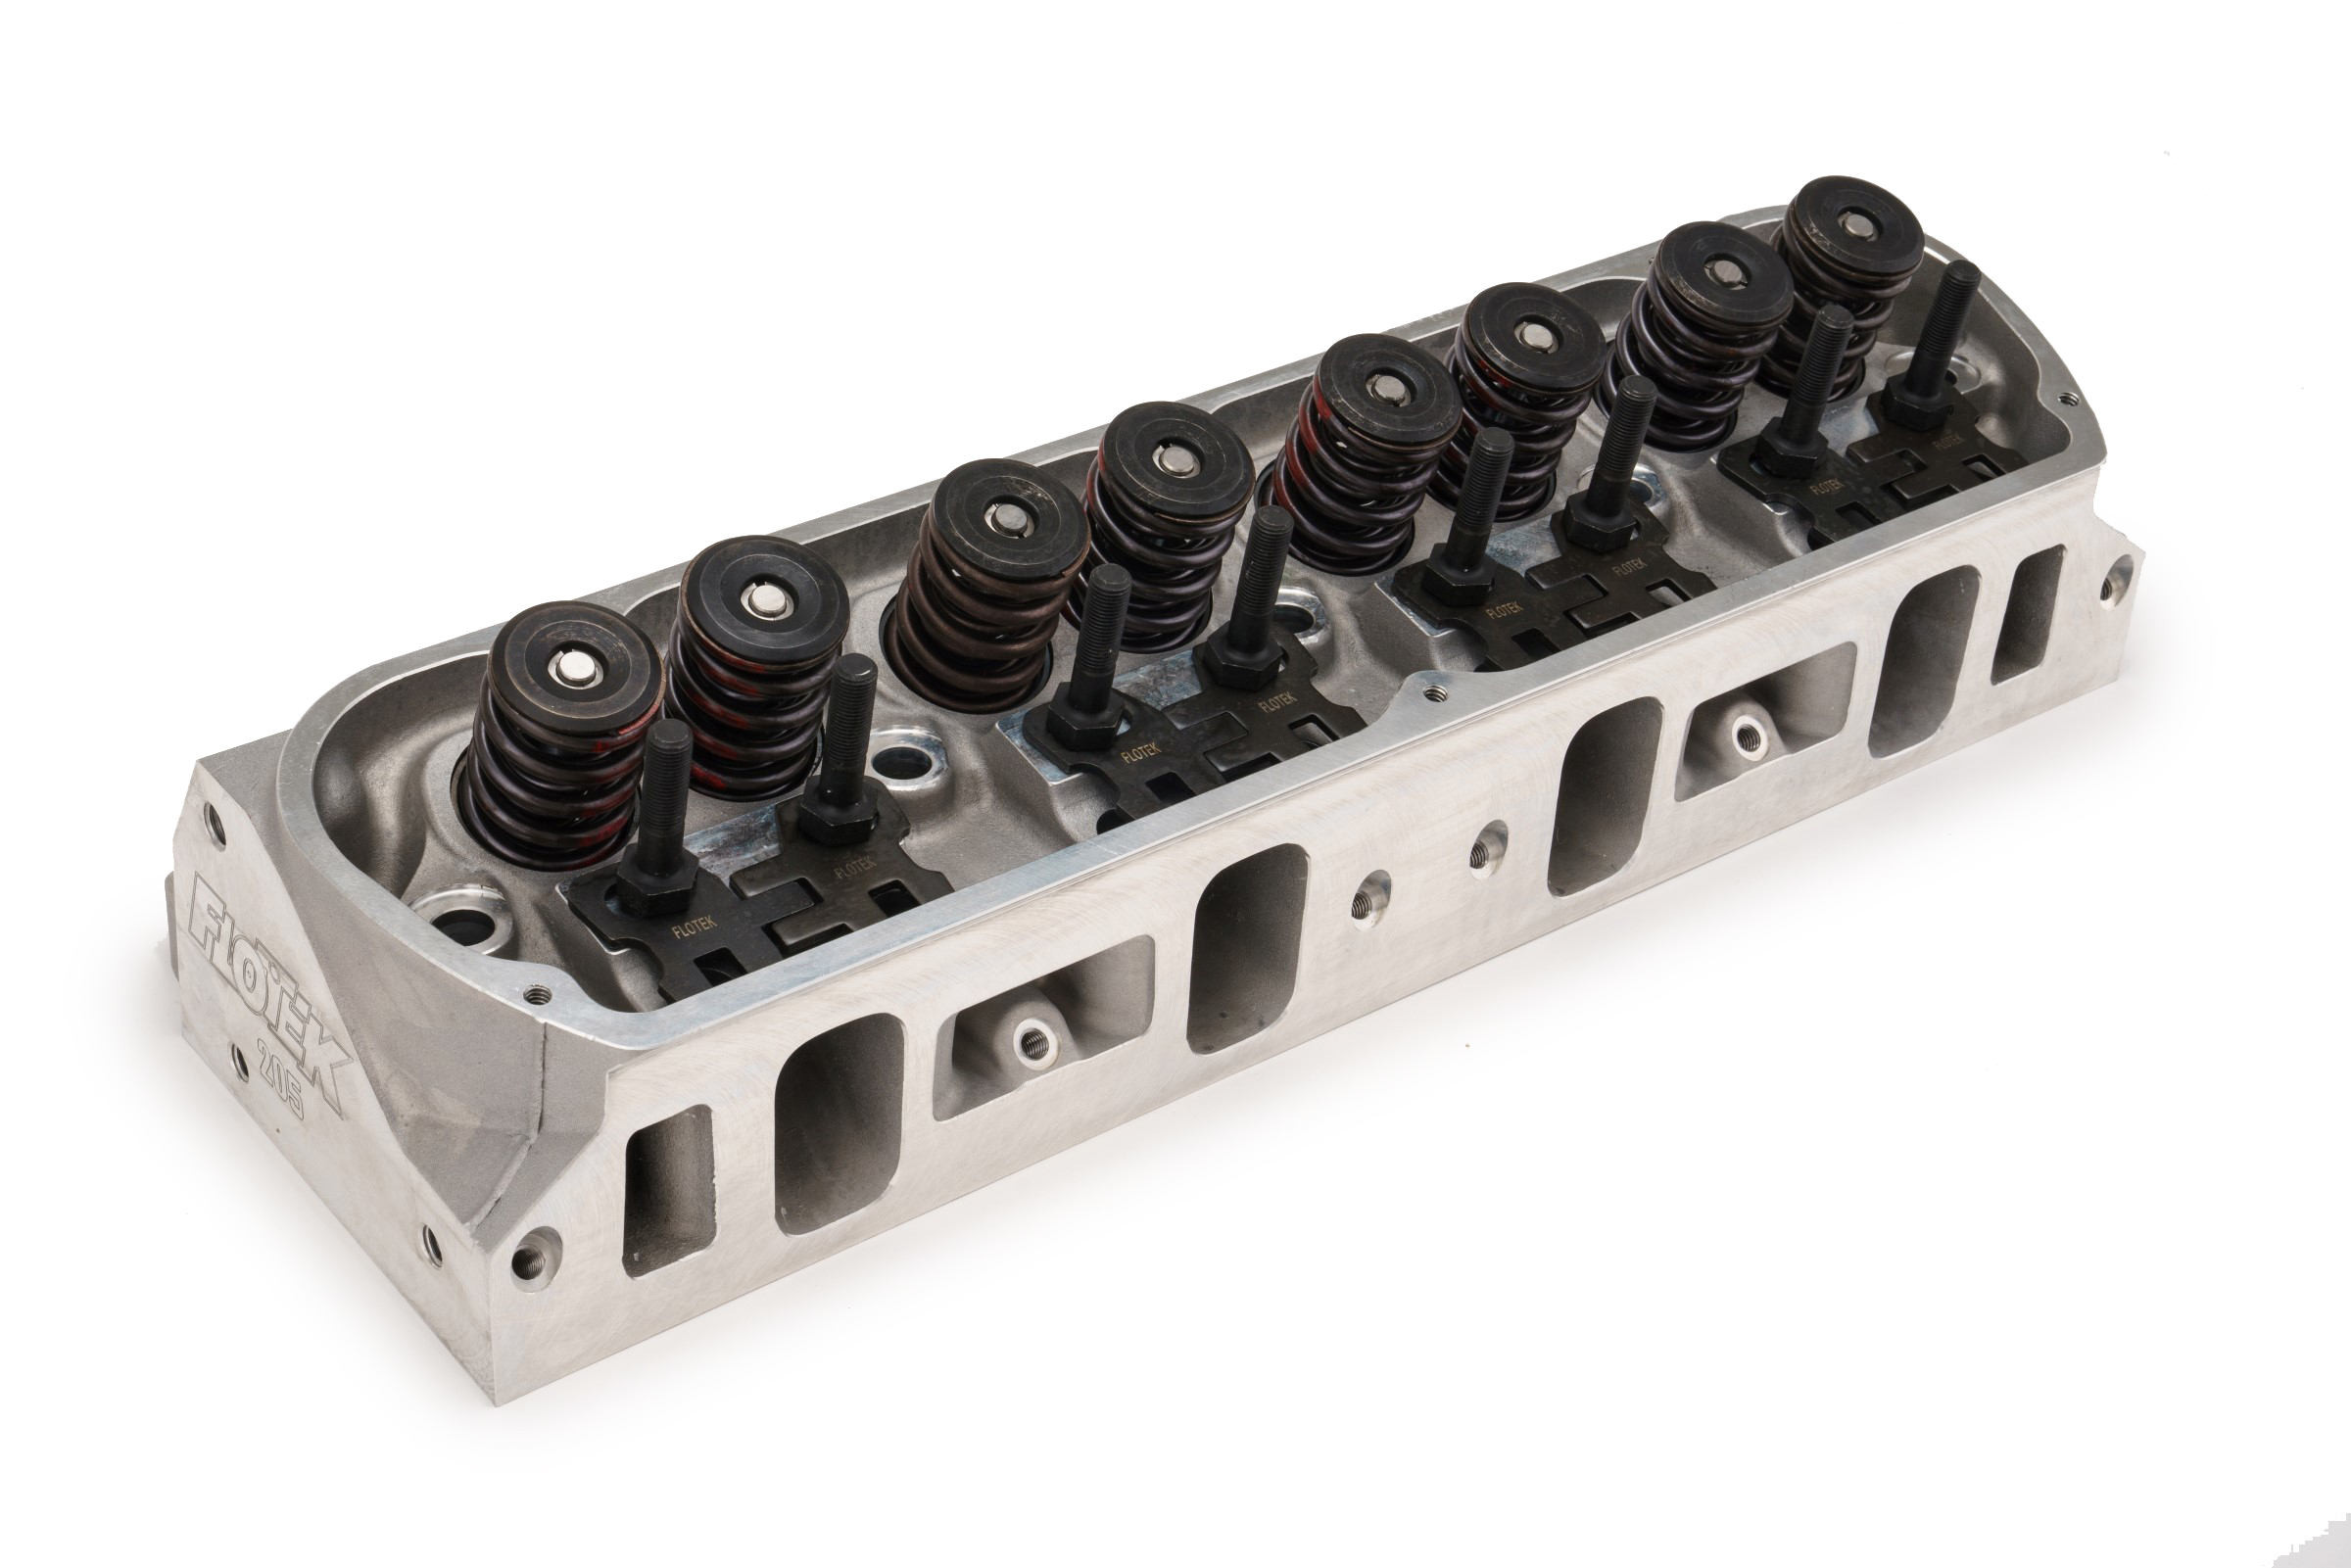 Flo Tek 2205-SR-505 Cylinder Head, The Hammer, Assembled, 2.080 / 1.600 in Valves, 205 cc Intake, 60 cc Chamber, 1.580 in Springs, Aluminum, Small Block Ford, Each